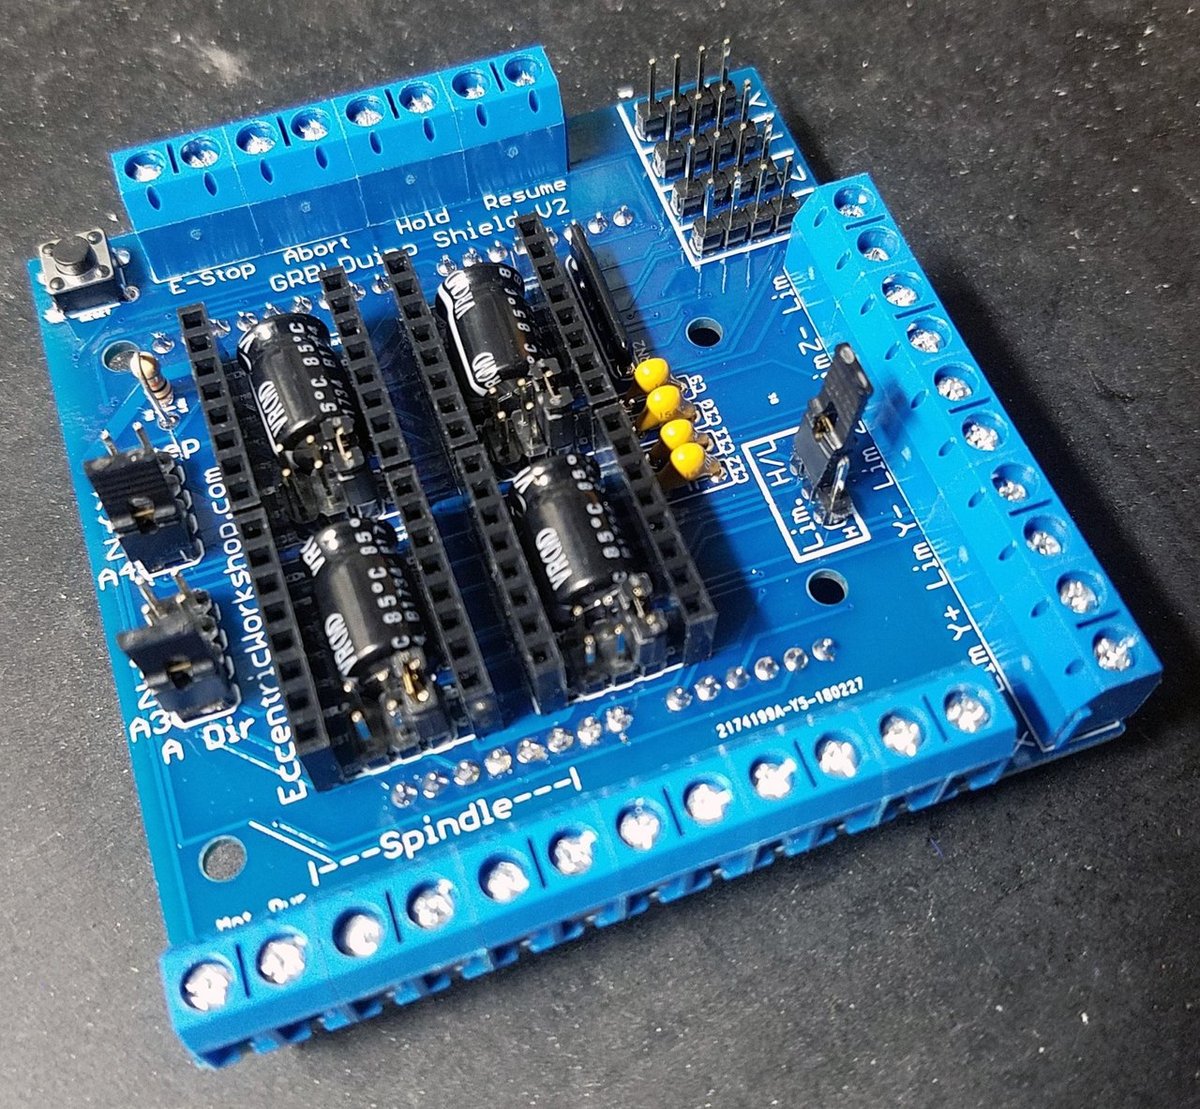 The GRBLduino Uno Shield can support up to four axes